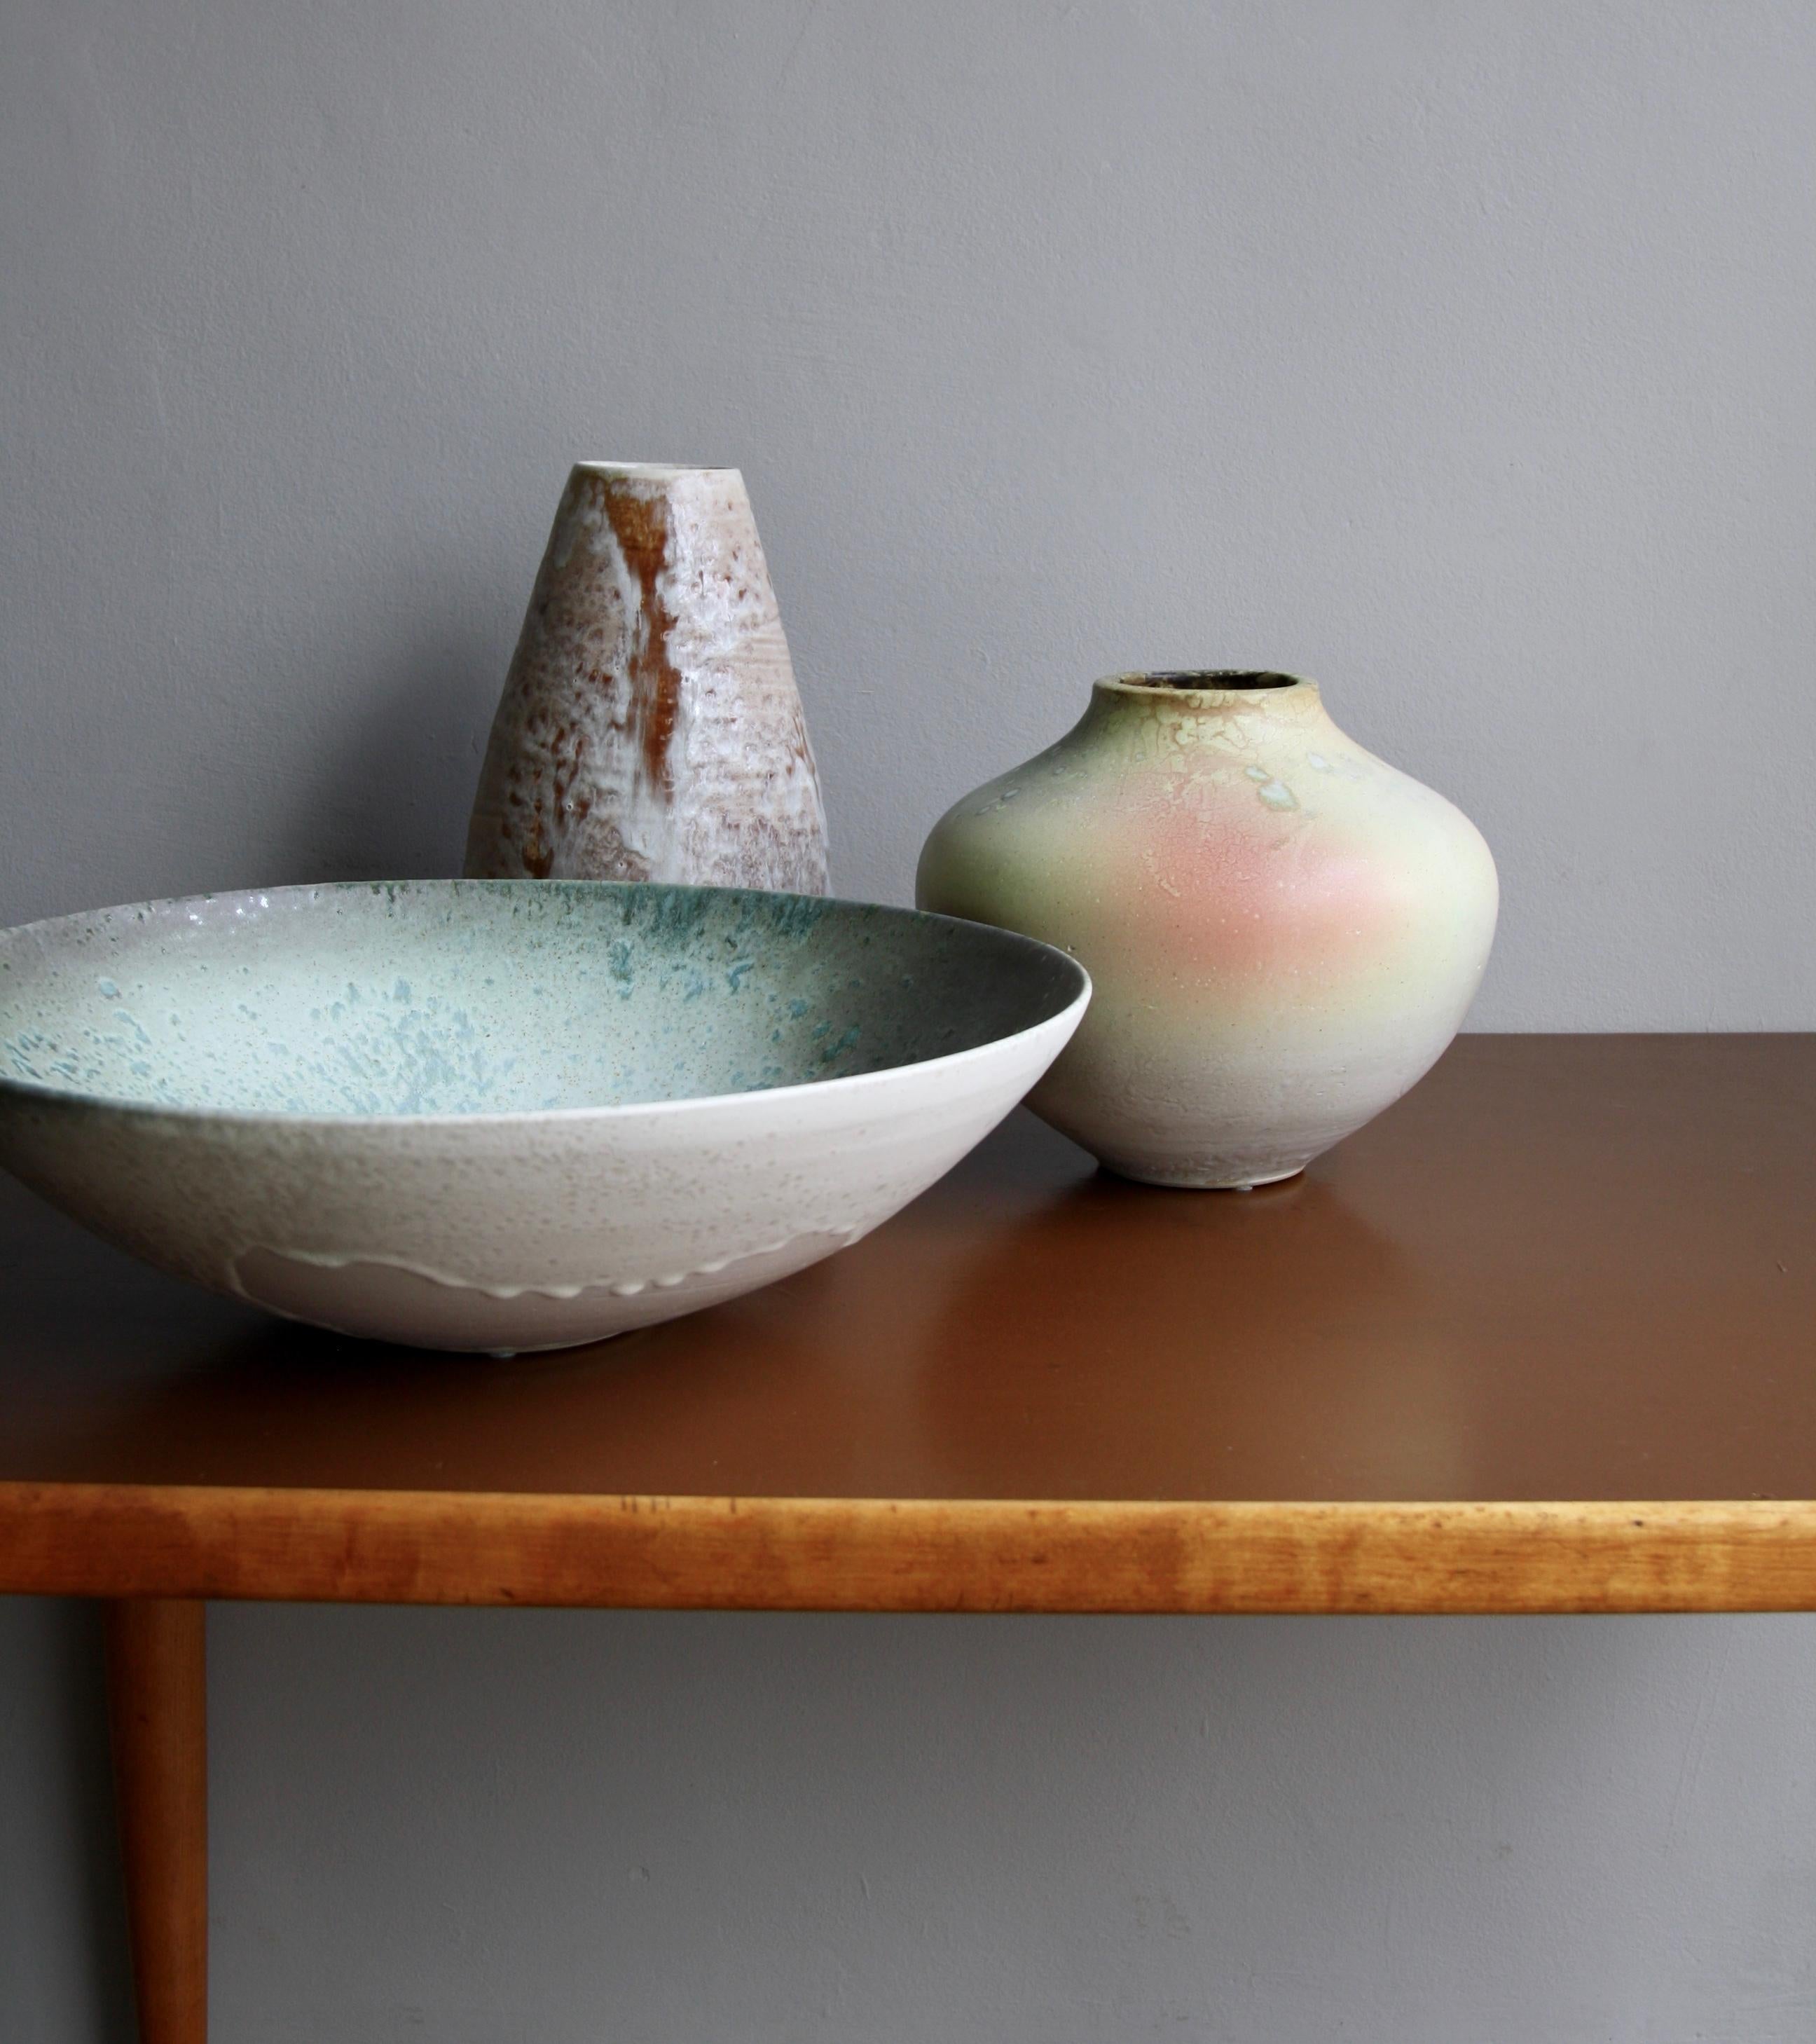 Aage and Kasper Würtz are a father and son team of studio ceramicists based near Horsens in eastern Jutland, Denmark. Known internationally for their hand-thrown and hand-glazed ceramics they have produced bespoke collections for distinguished Fine